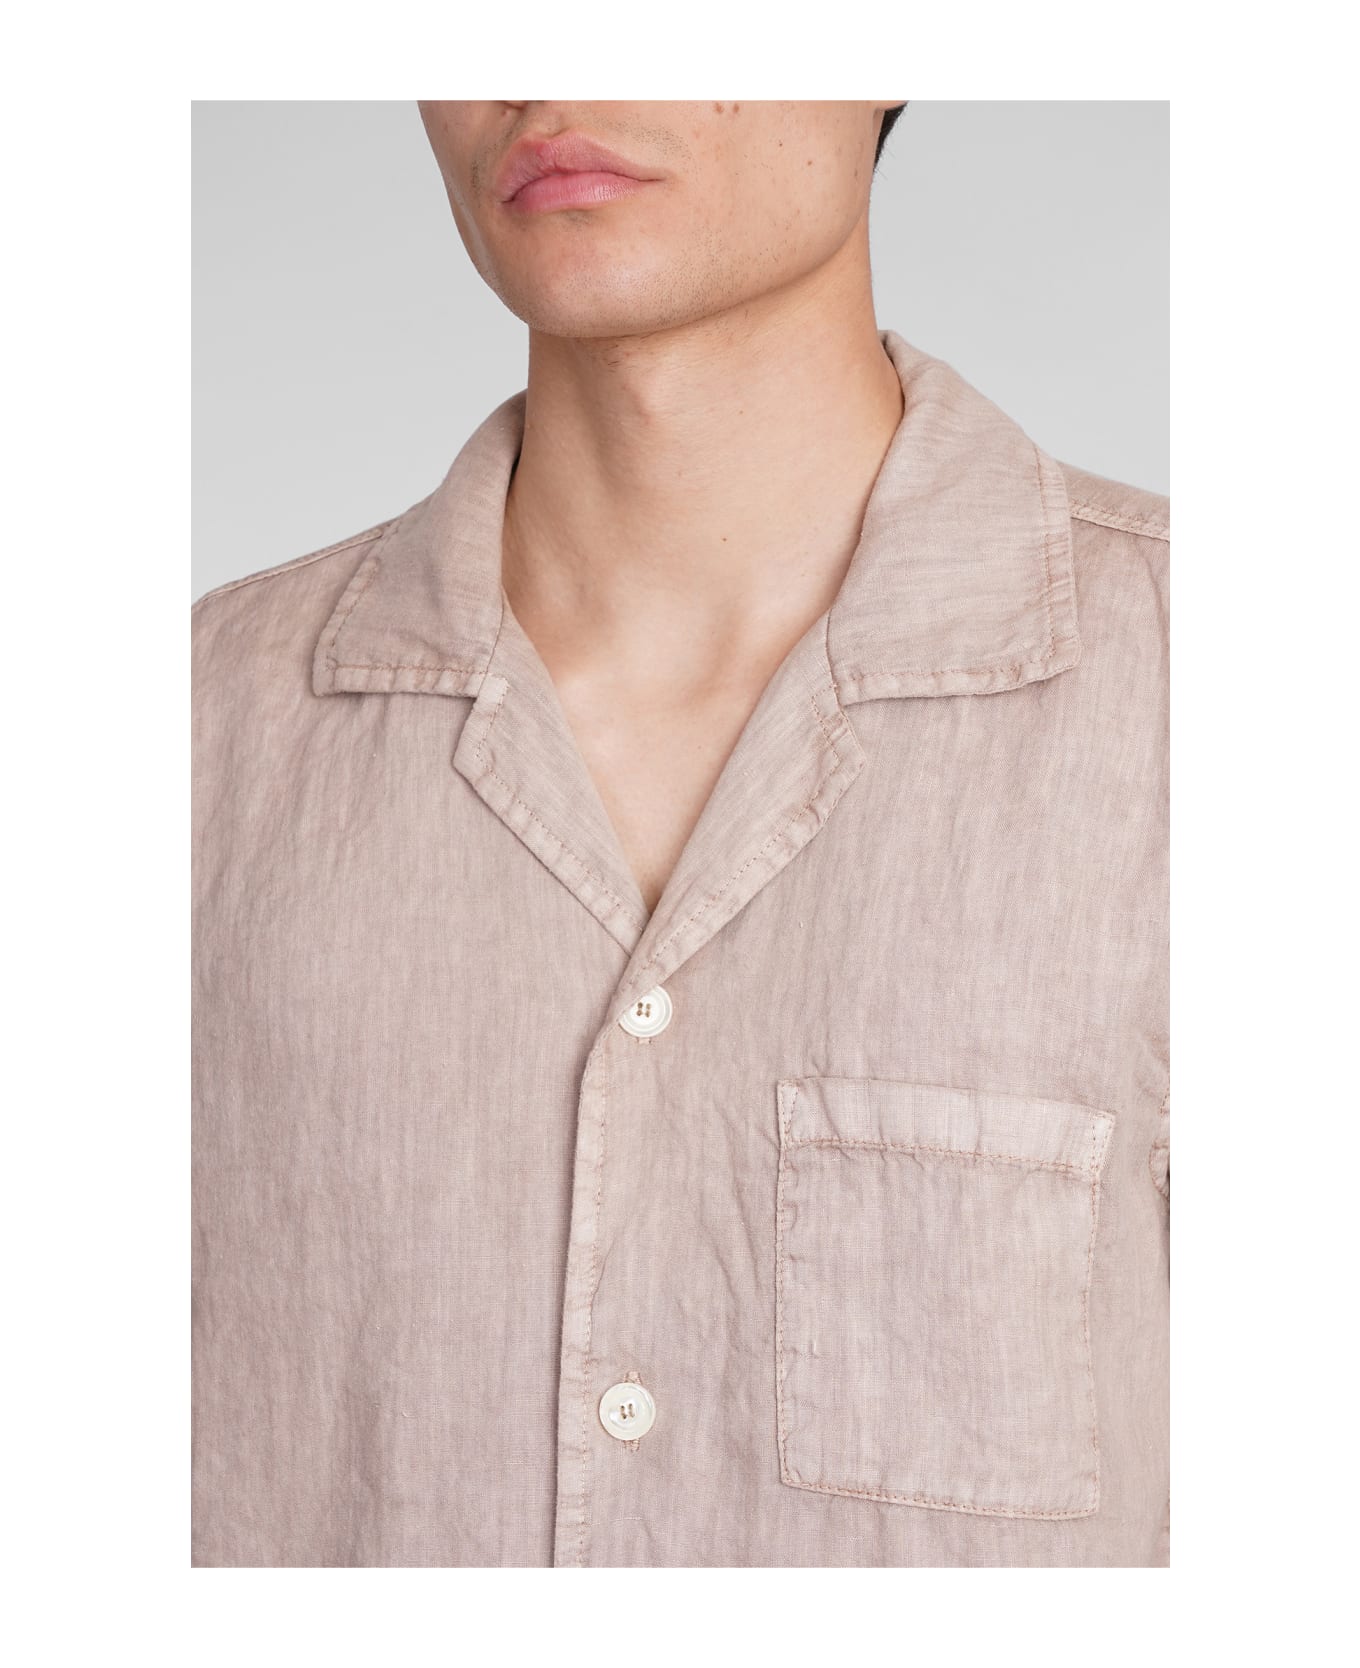 Aspesi Camicia Ago Shirt In Rose-pink Linen - rose-pink シャツ